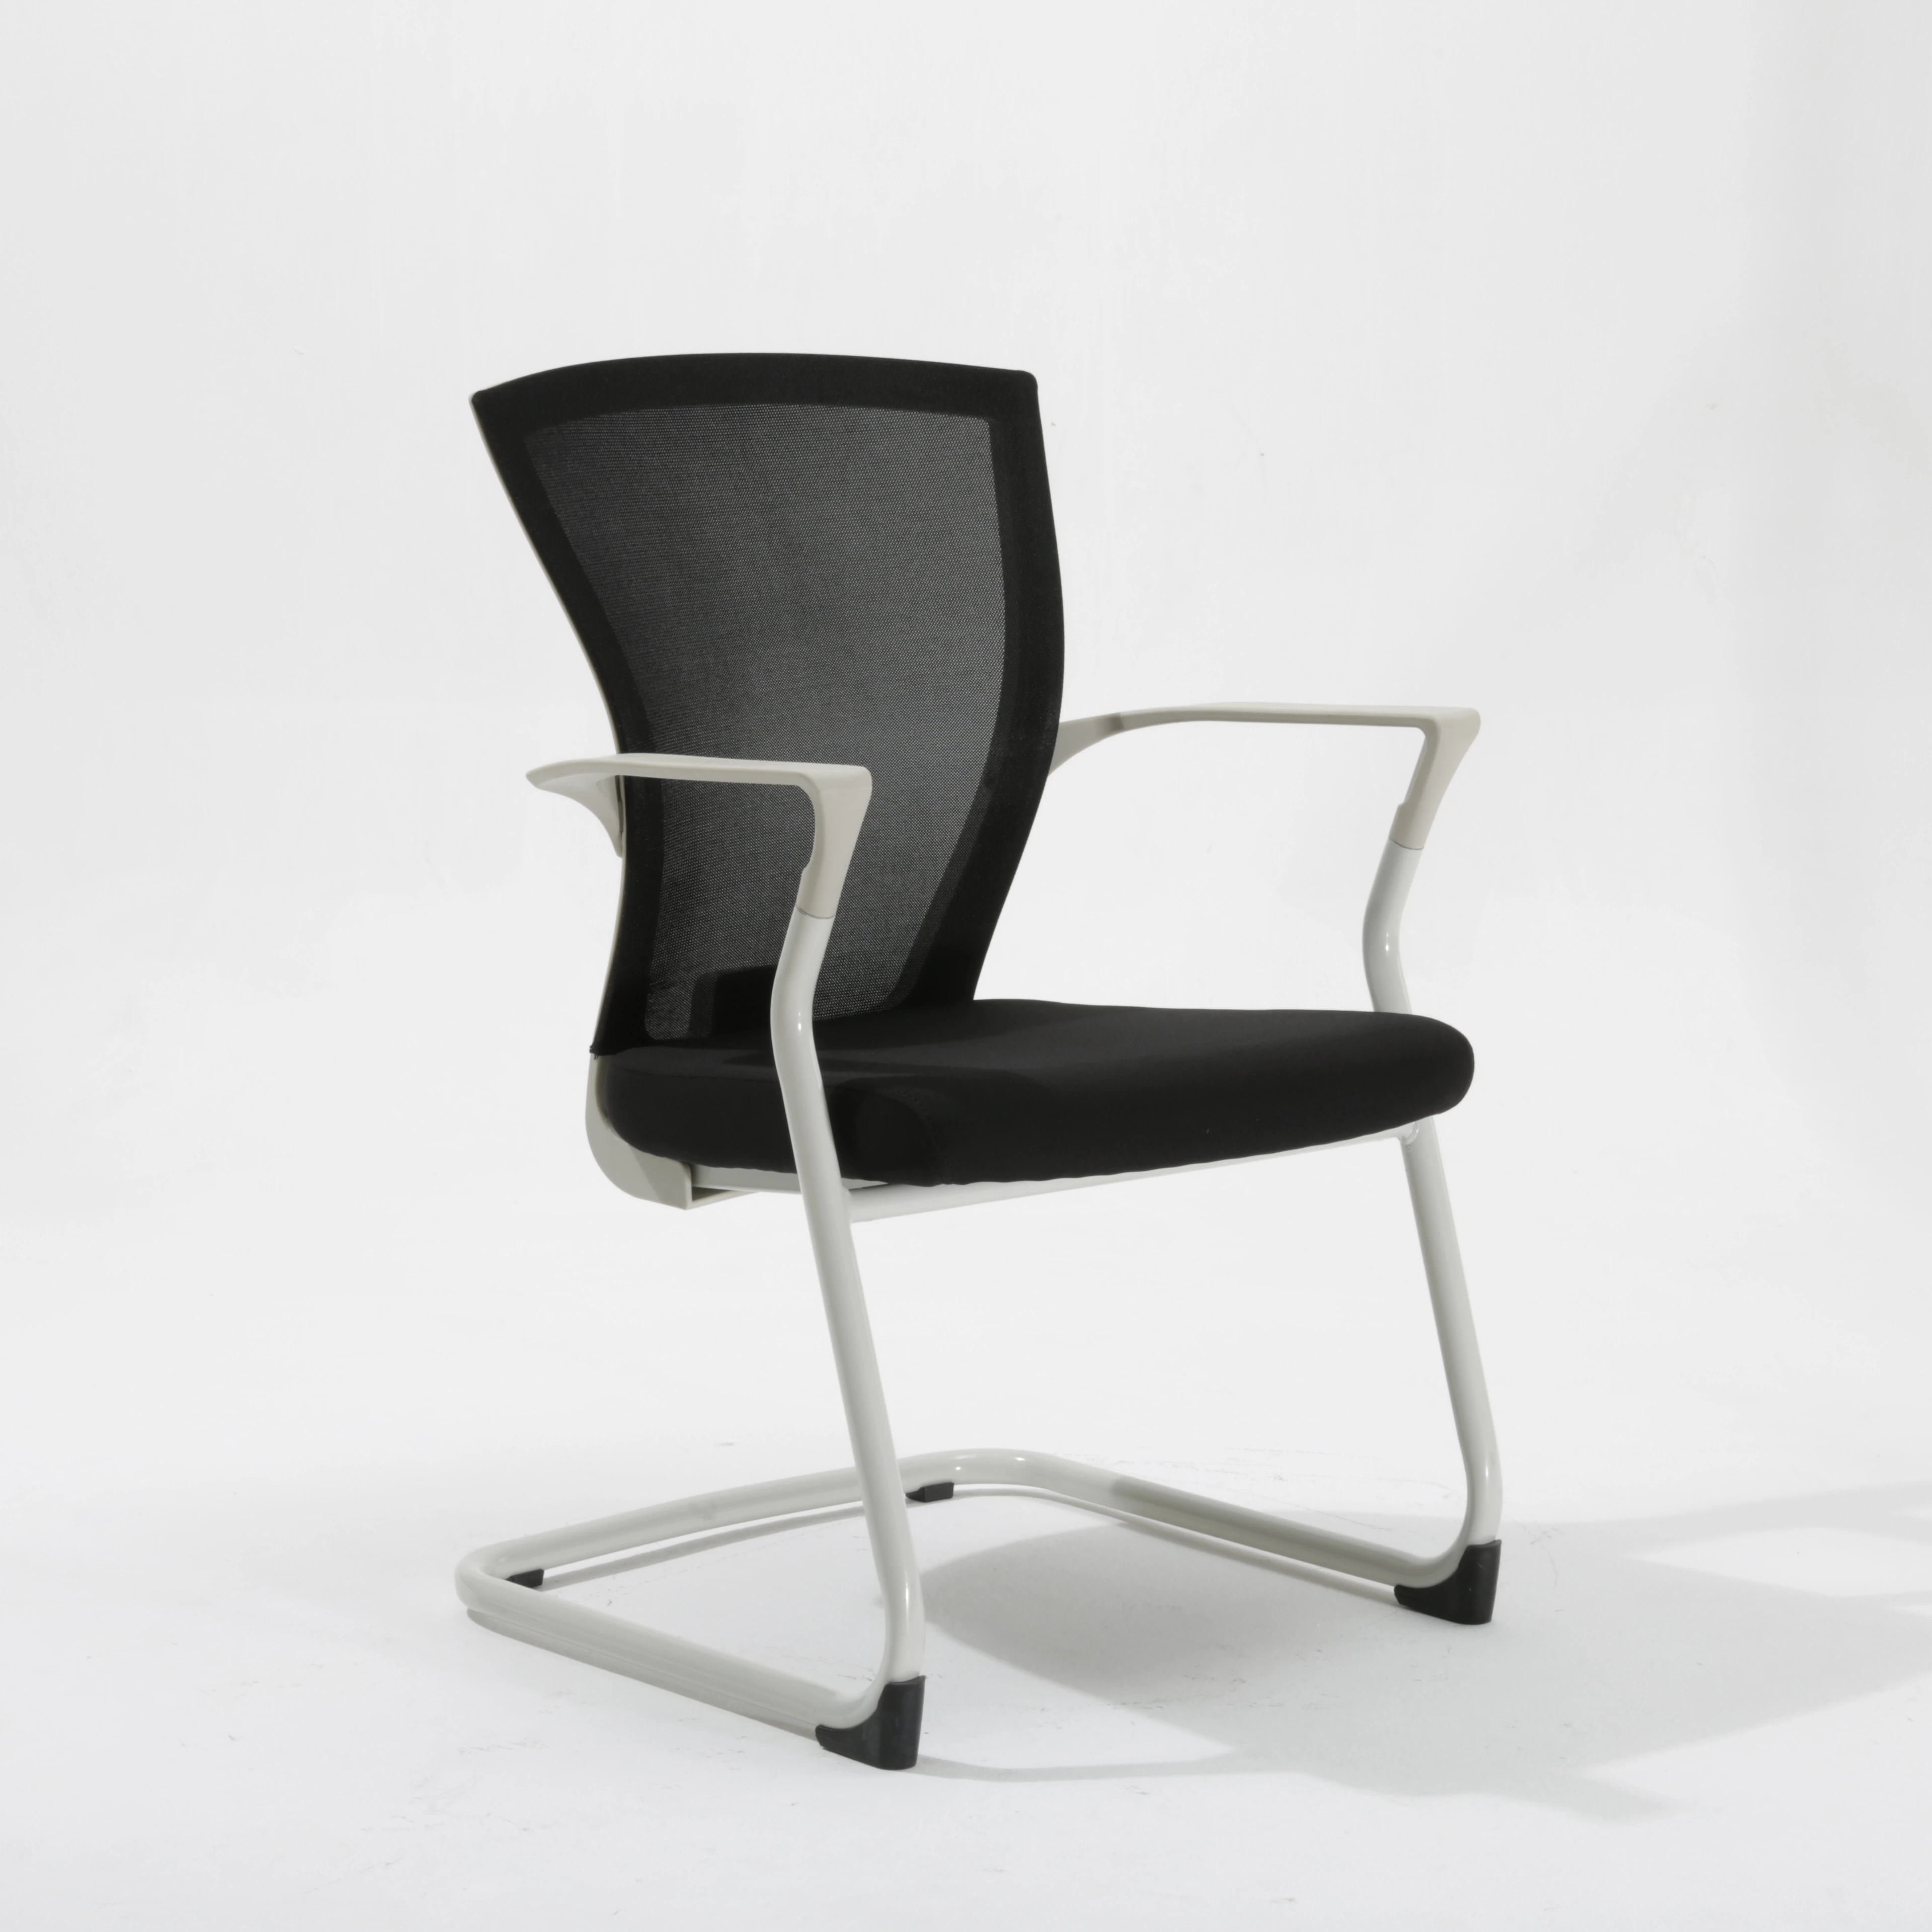 Color : White Executive Recline Bow-Shape Office Chair Ergonomic Desk Chairs Armrest Computer Chair Staff Chair Office Furniture Padded Office Chair